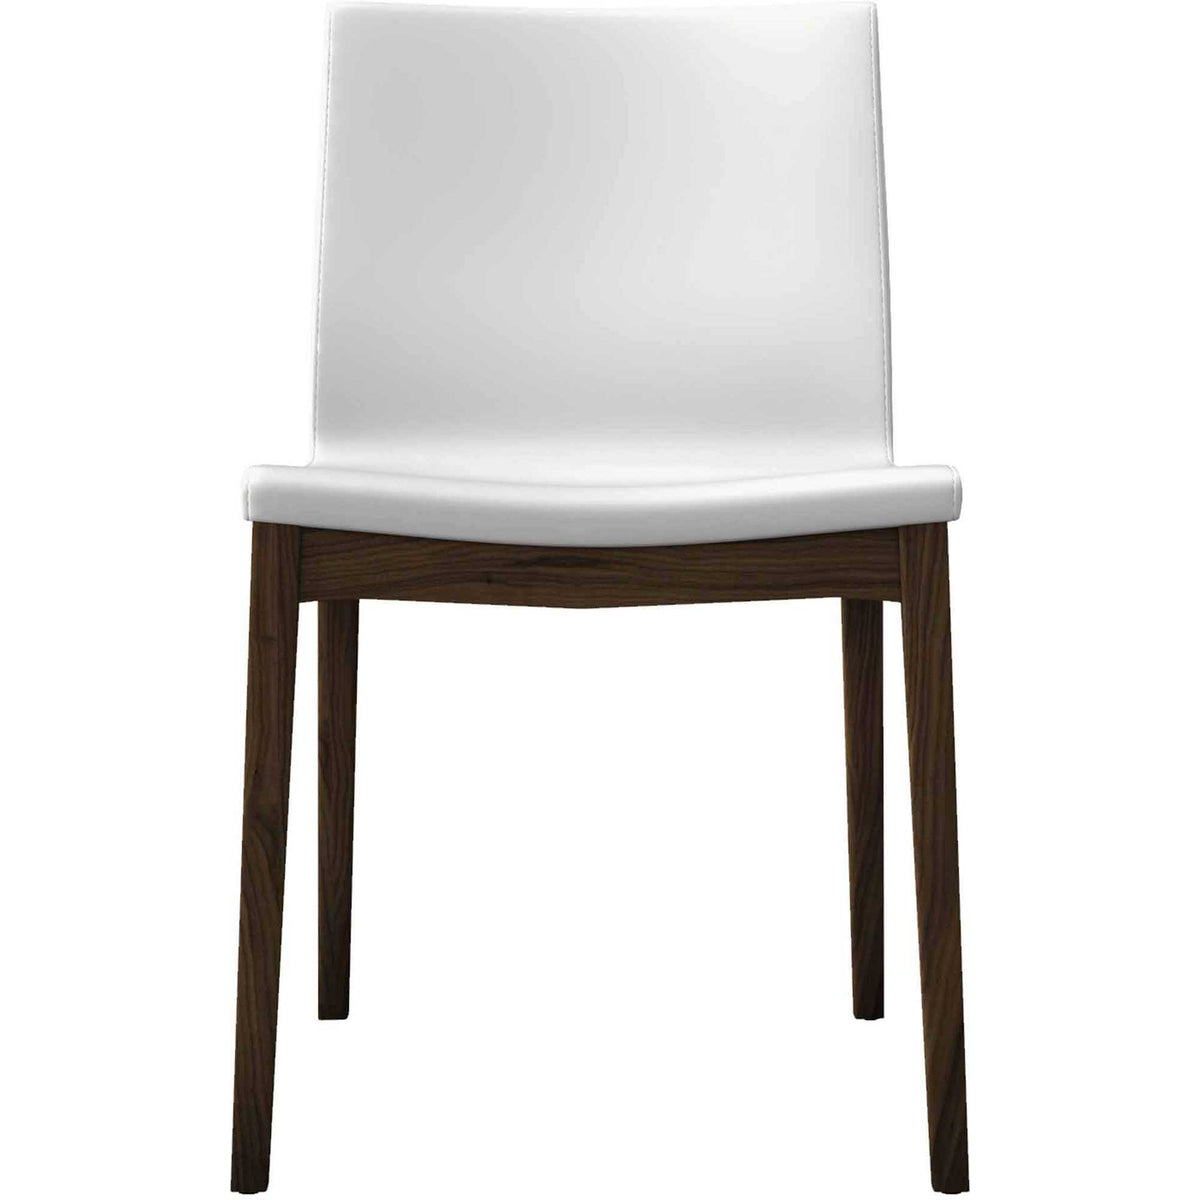 Enna Dining Chair White/Canaletto Walnut (Set of 2)